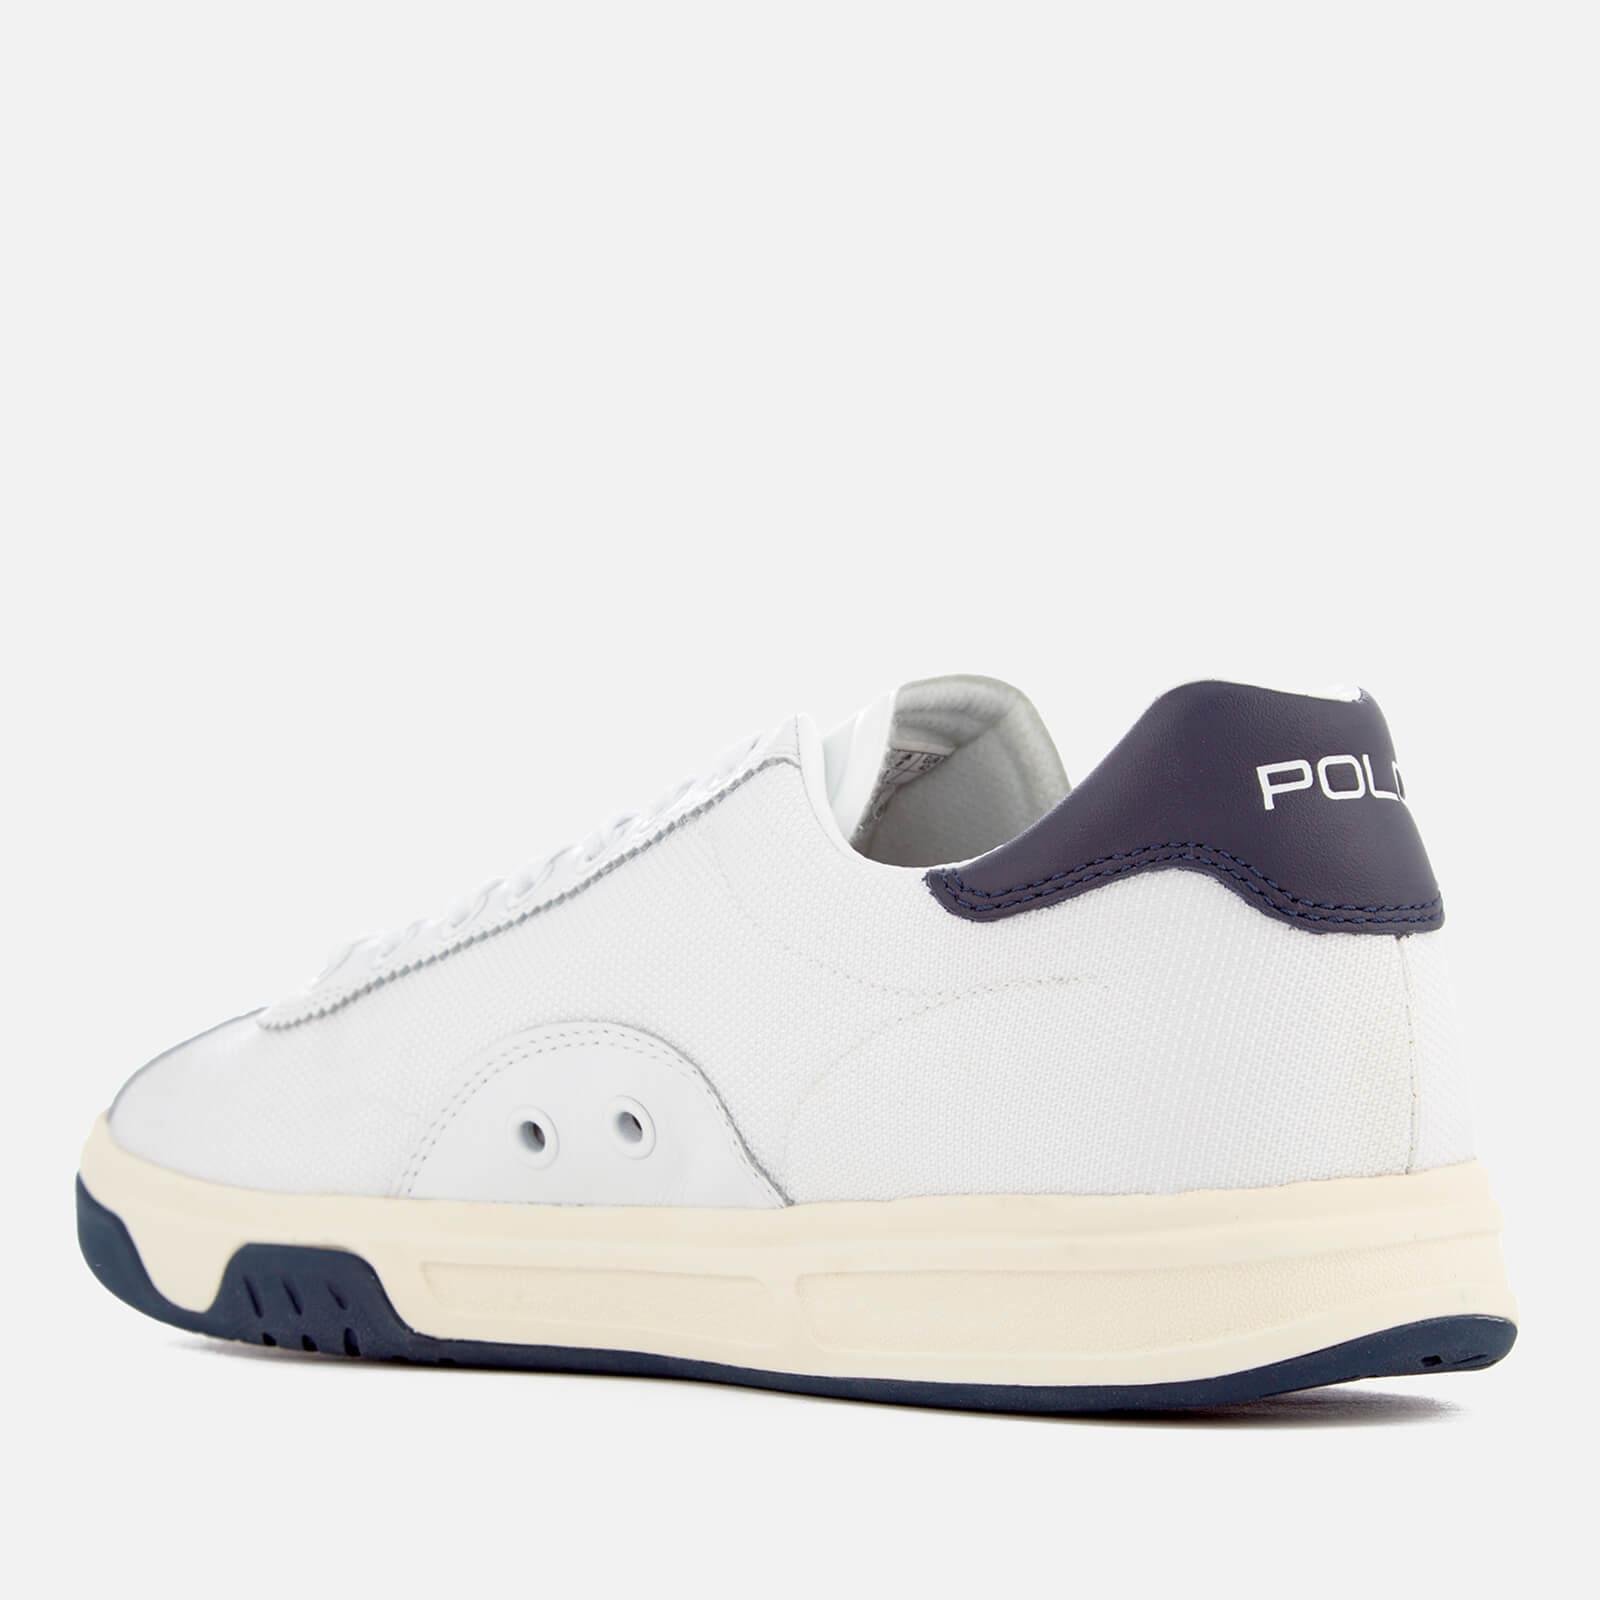 court 100 leather sneaker